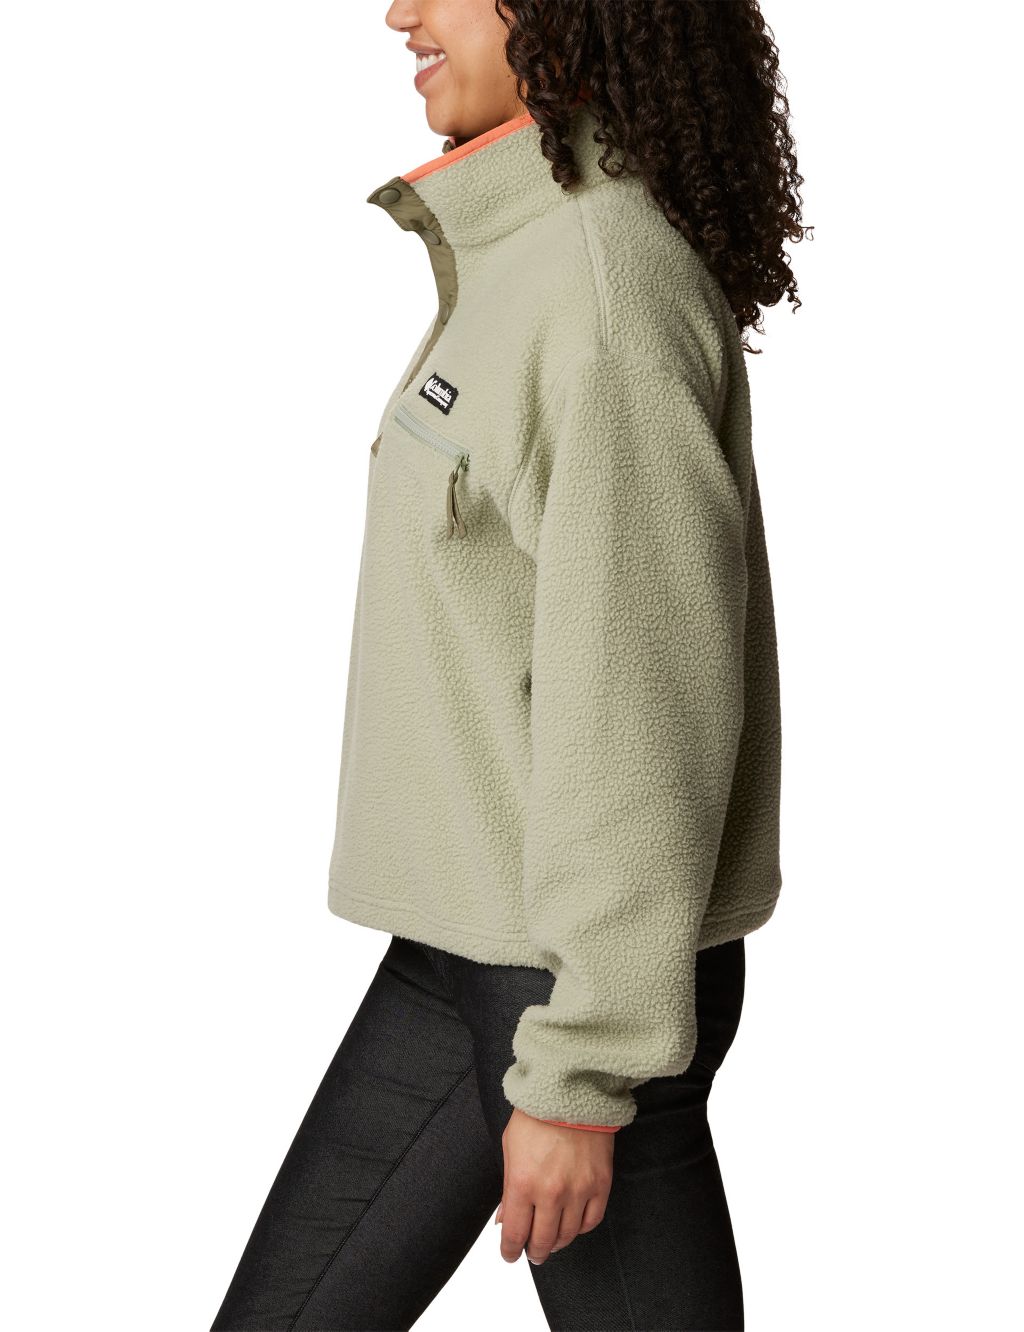 Helvetia Funnel Neck Cropped Jacket image 2